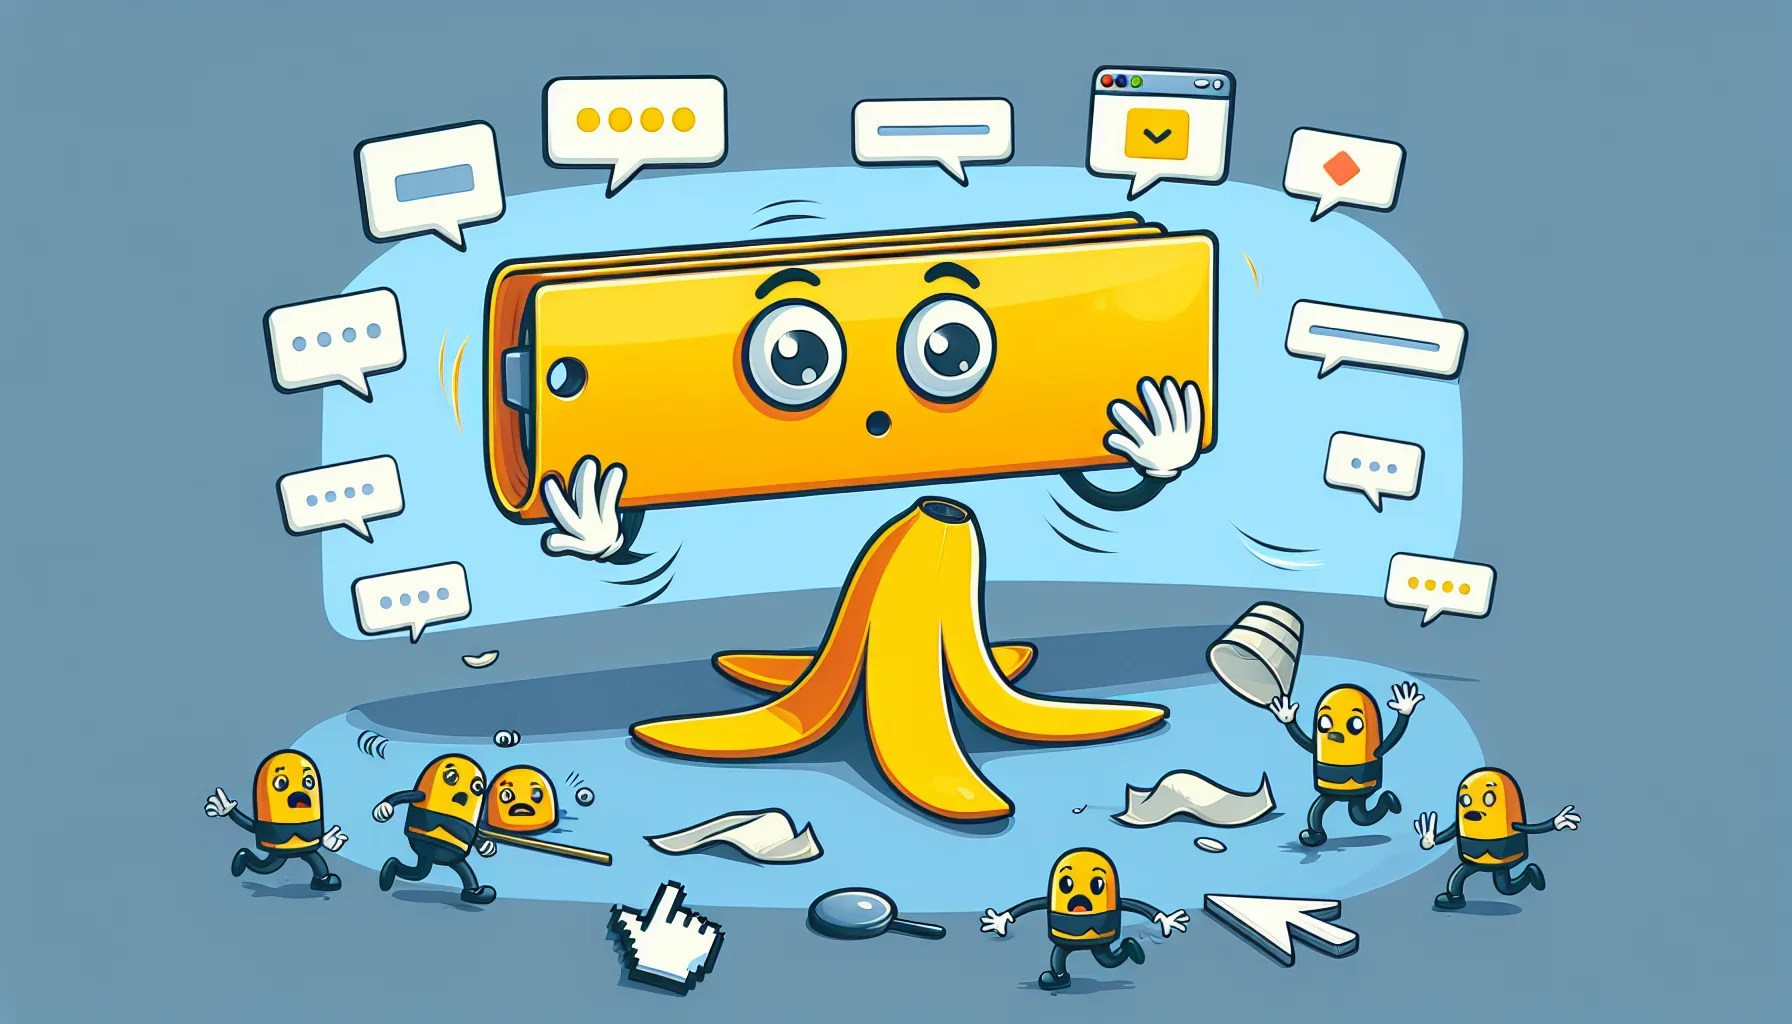 Create a fun and playful image showing a comedic scene related to web hosting. In the center, there is a large, attention-grabbing banner, like an announcement bar from a website. This banner comes to life with cartoon eyes, arms, and legs. It's participating in some slapstick humor, maybe slipping on a digital banana peel or juggling a bunch of different website icons. Its antics seem to be trying to convince the other elements in the scene, such as web icons and cursors, about the benefits of choosing a good web hosting platform, making the situation amusing and entertaining.